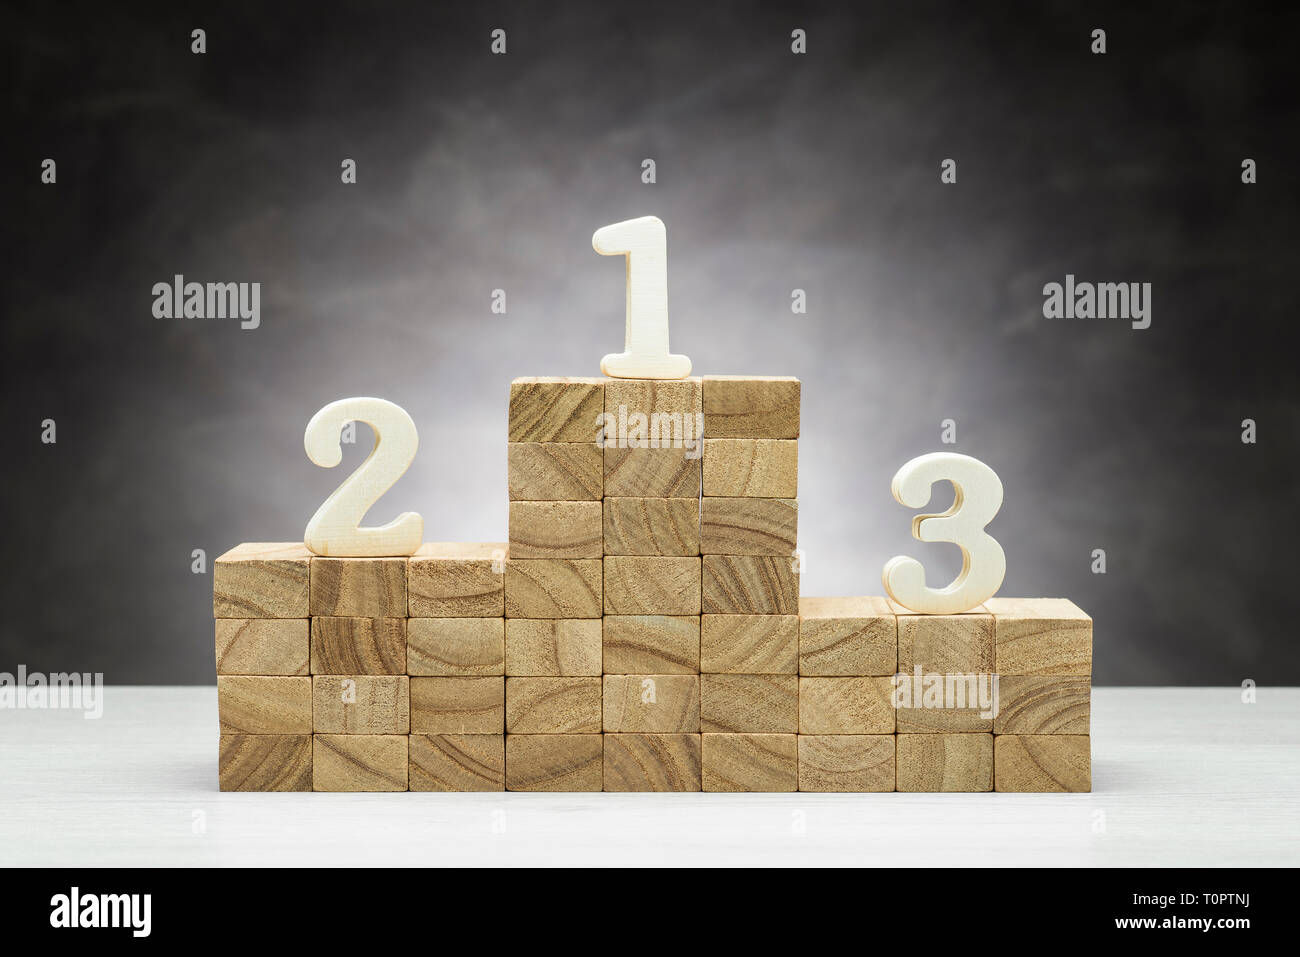 Concept of competition. Wooden podium on grey background with numbers. Stock Photo